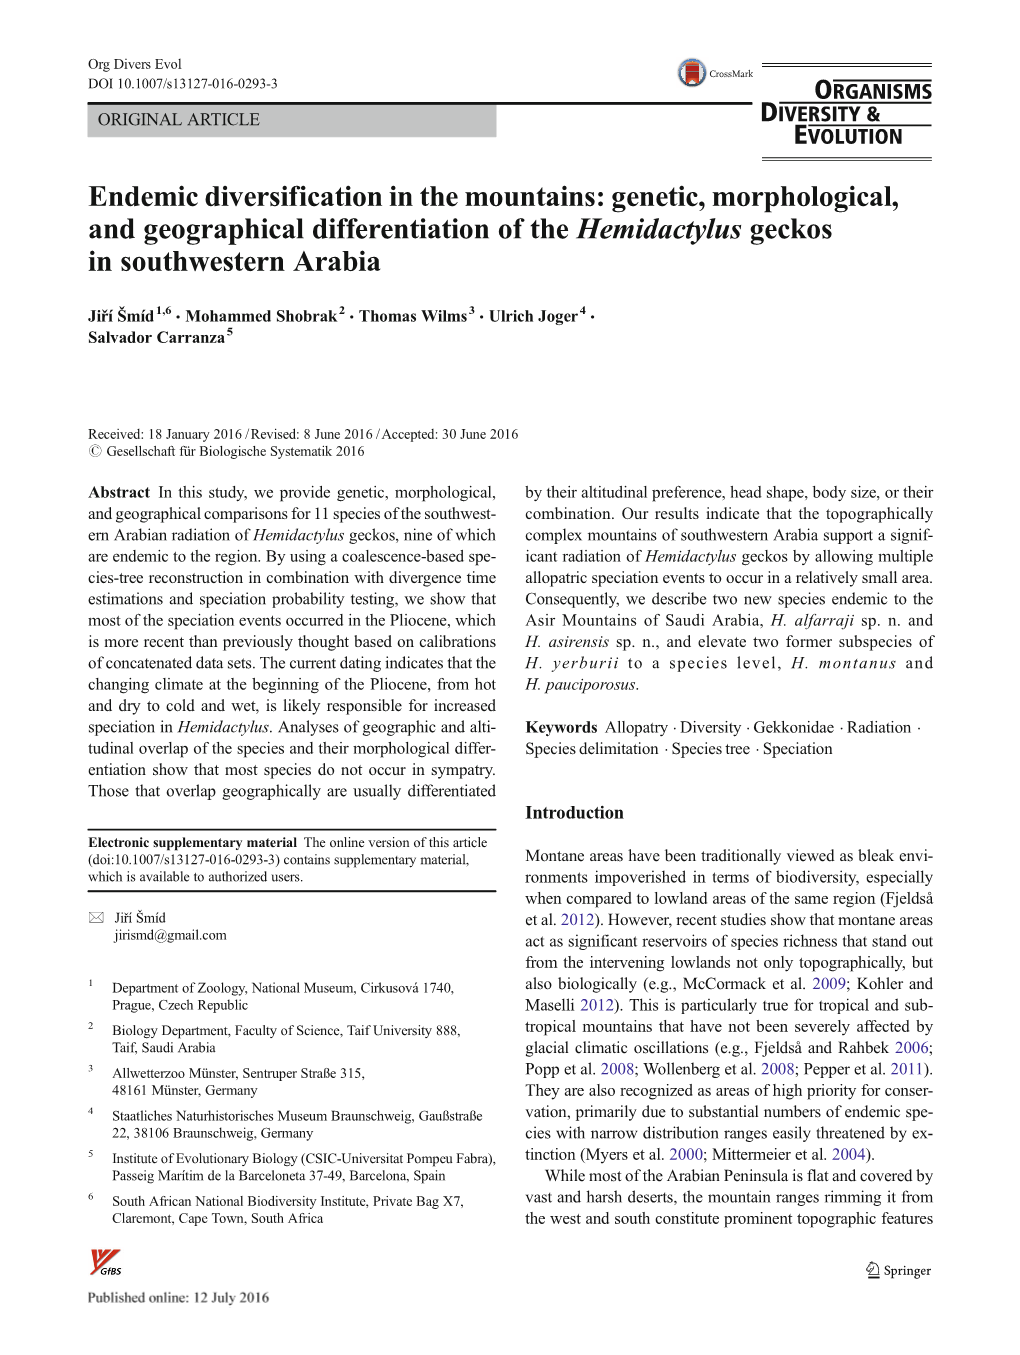 Endemic Diversification in the Mountains: Genetic, Morphological, and Geographical Differentiation of the Hemidactylus Geckos in Southwestern Arabia